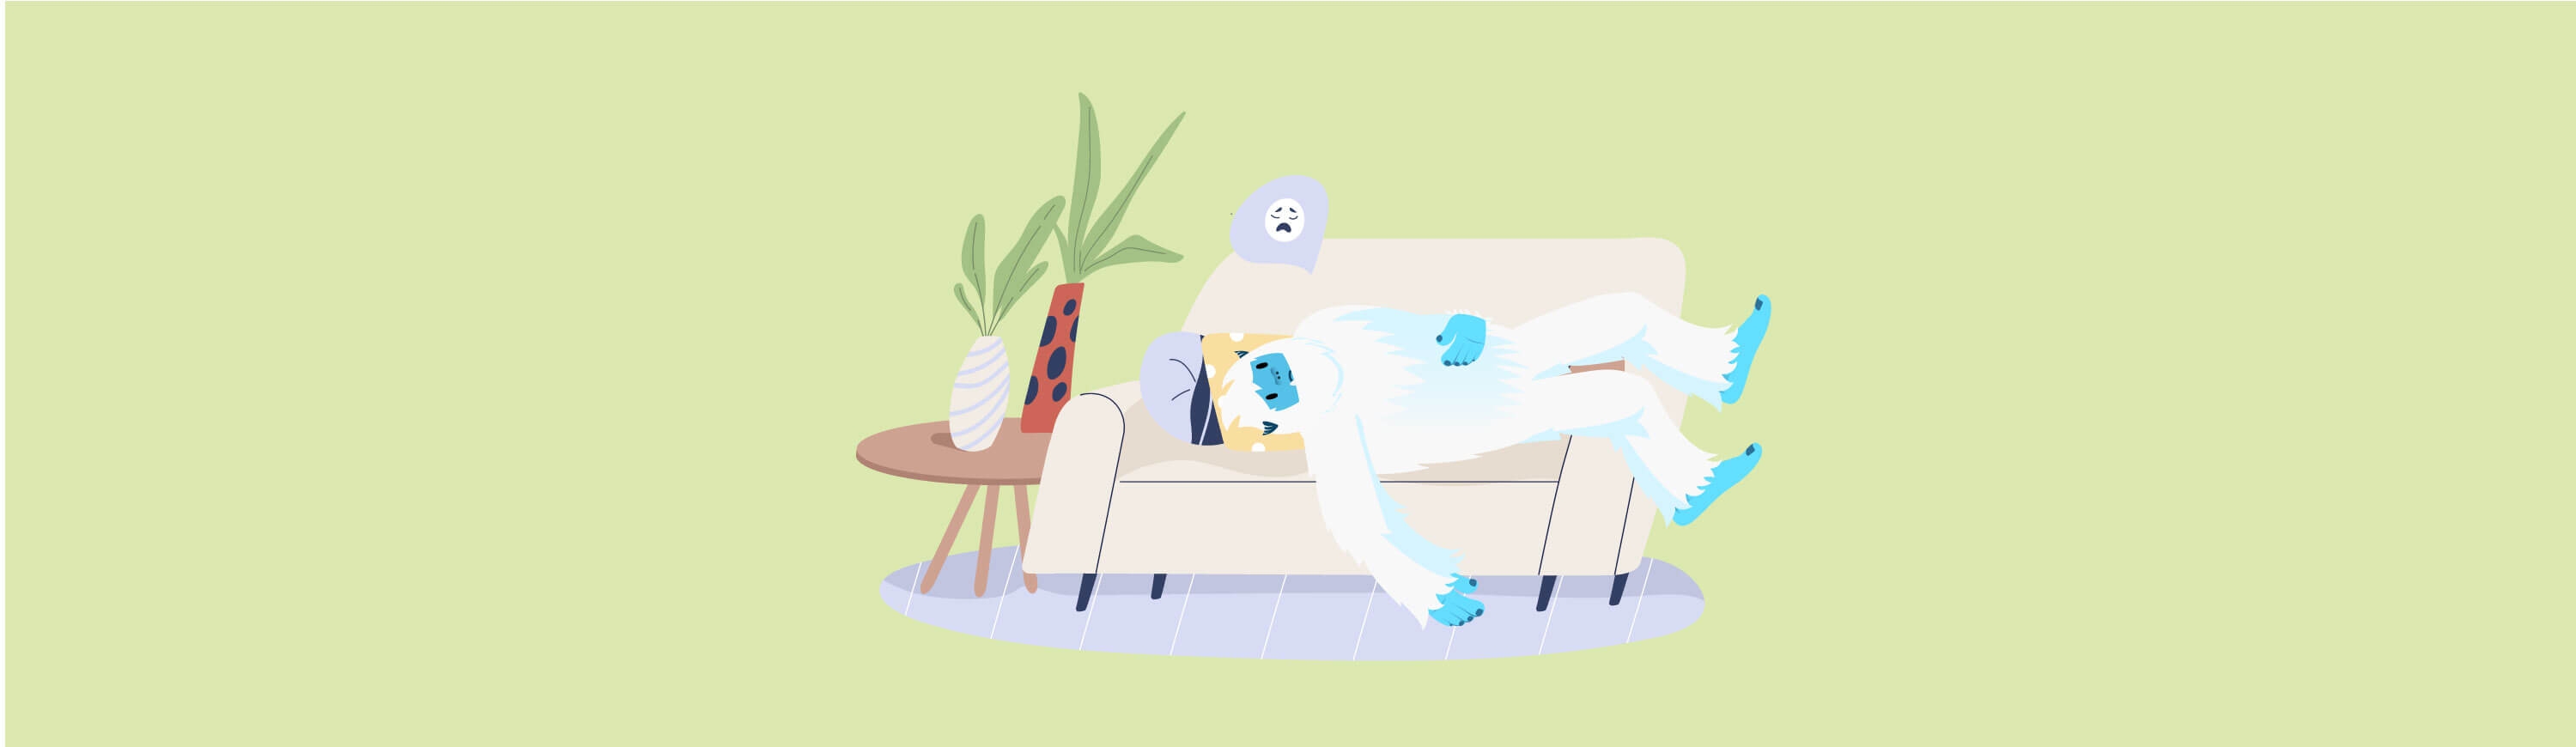 Illustration of Carl the yeti laying on the couch looking frustrated.